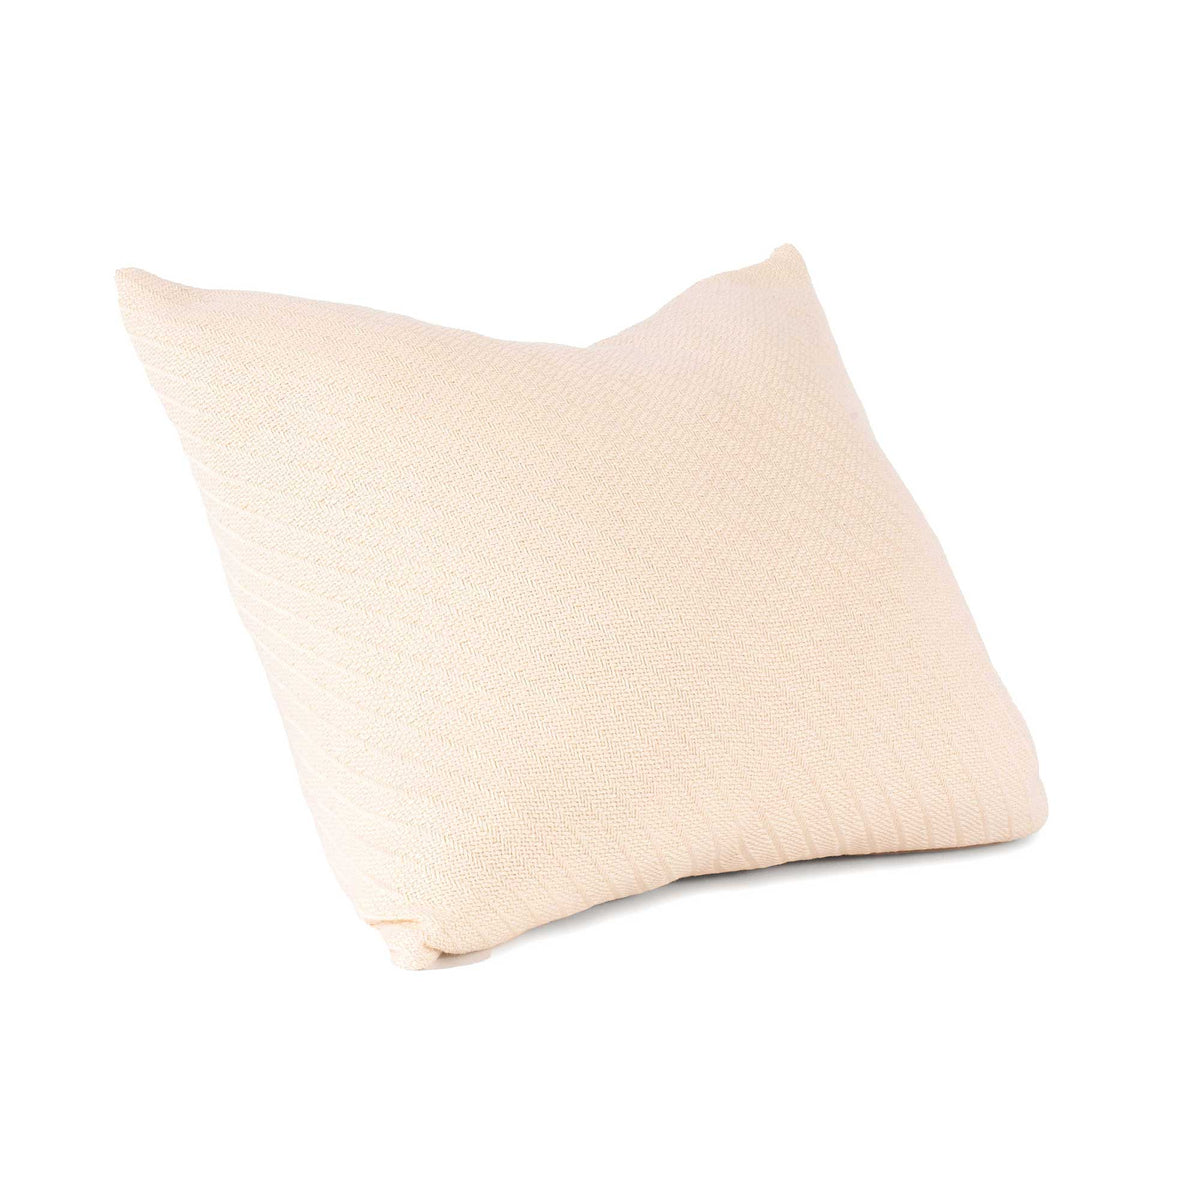 Natural Basket Weave - Cotton Throw Pillows - American Blanket Company